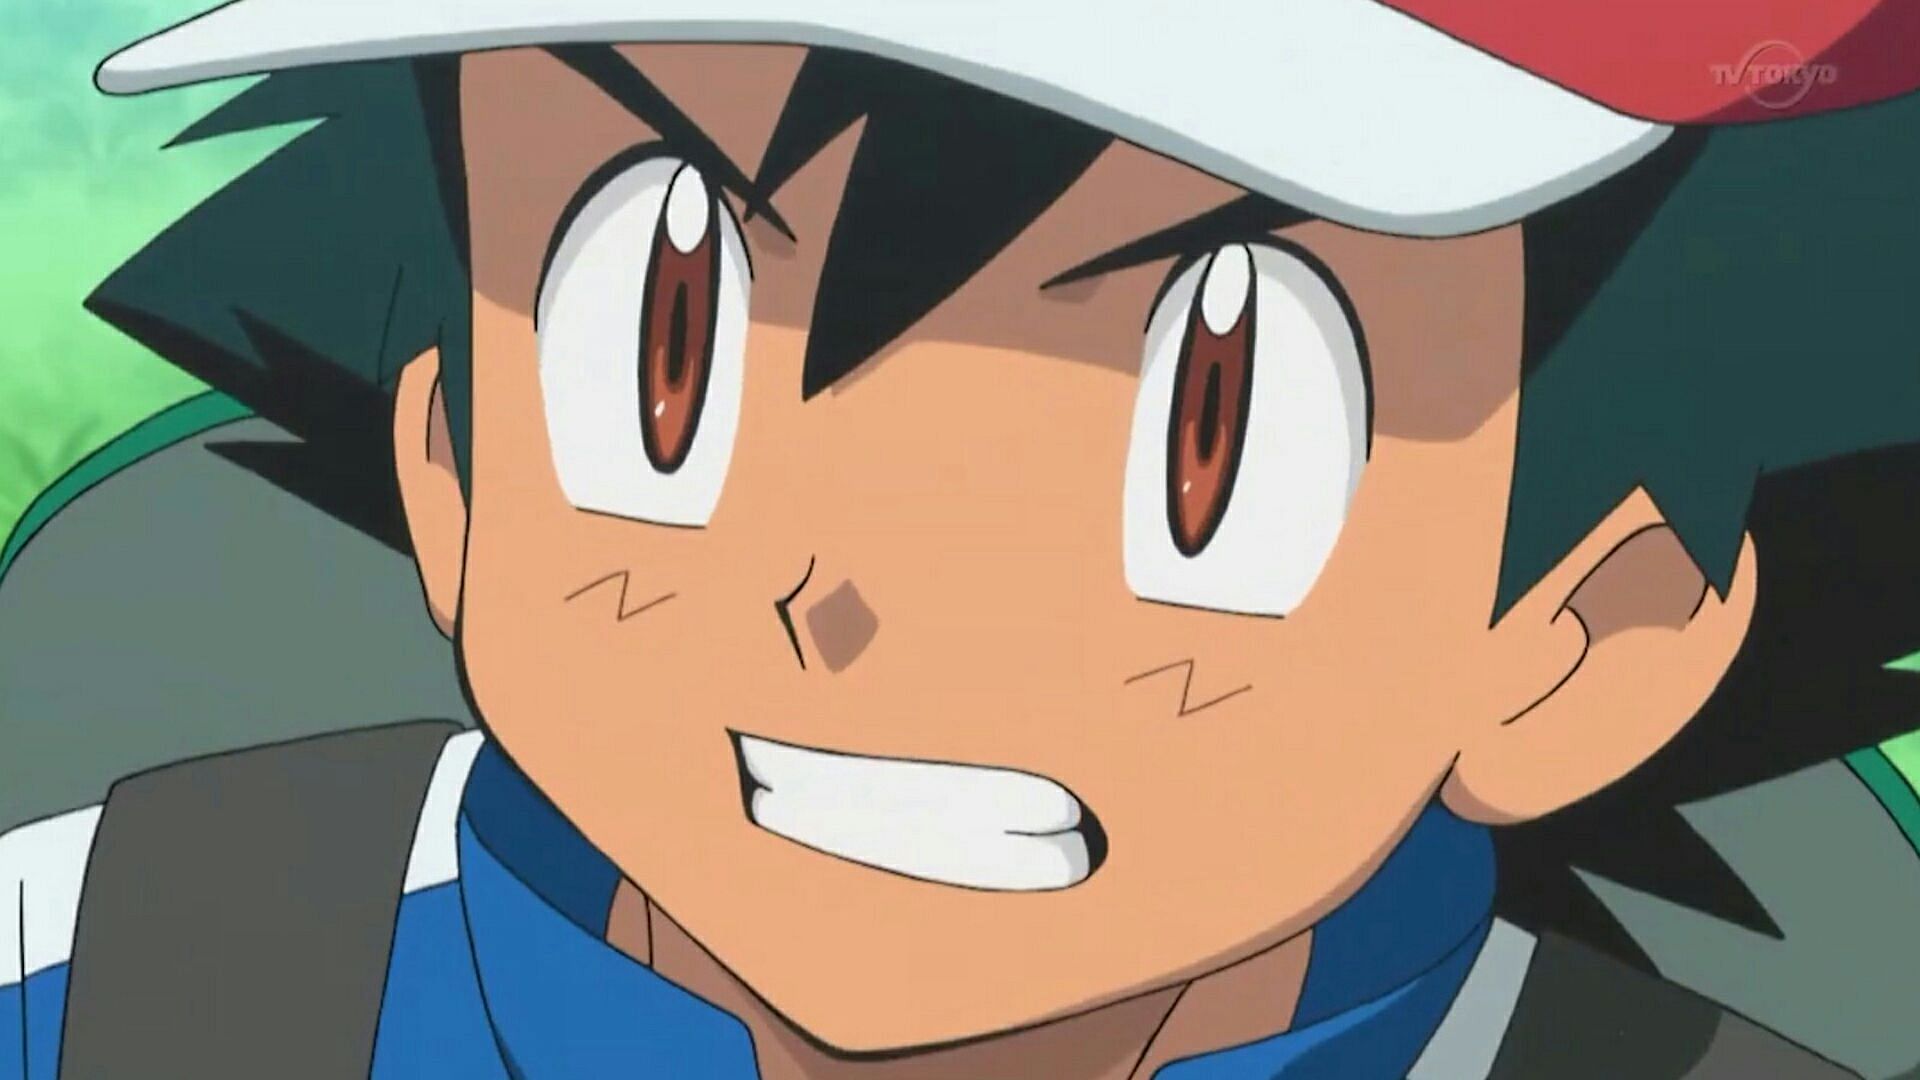 Pokemon: Why does Ash have lines on his face?